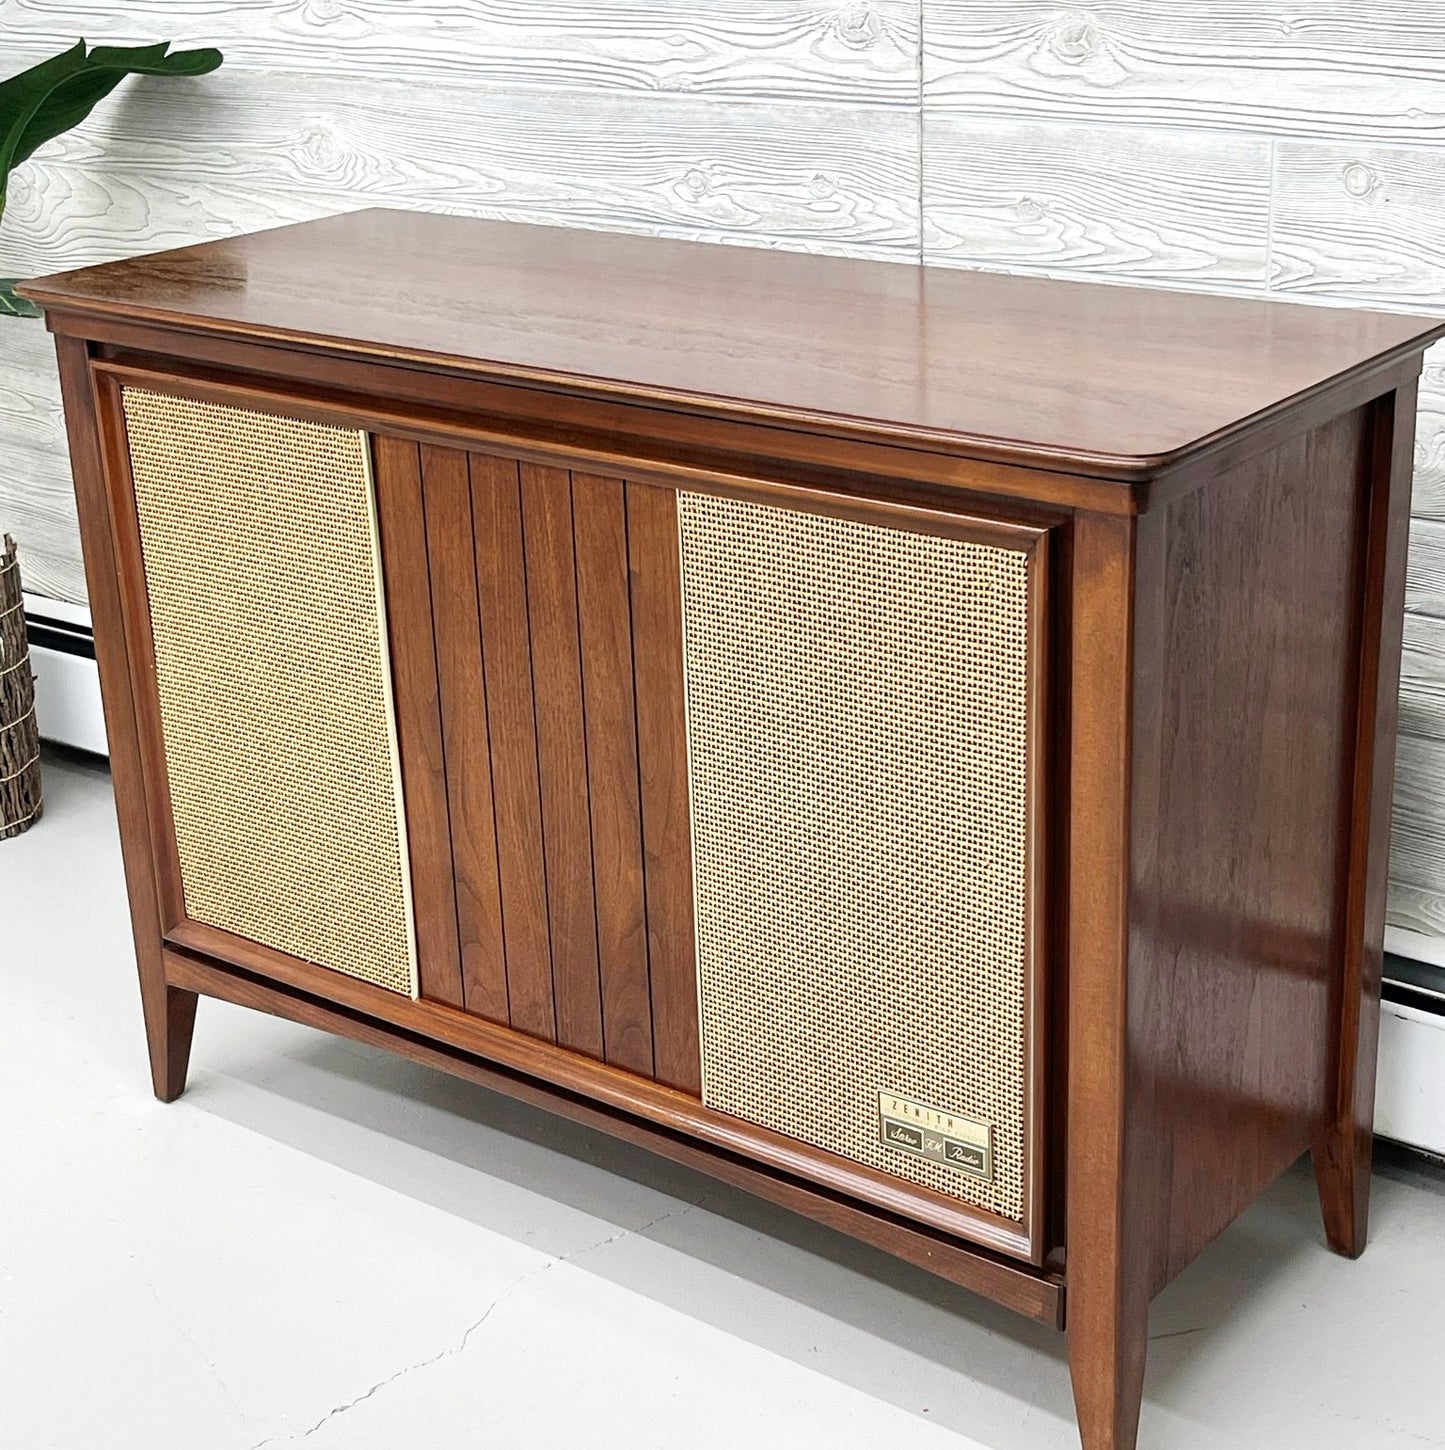 SOLD OUT ZENITH Mid Century 60s Stereo Console Record Player Changer AM FM Bluetooth The Vintedge Co.